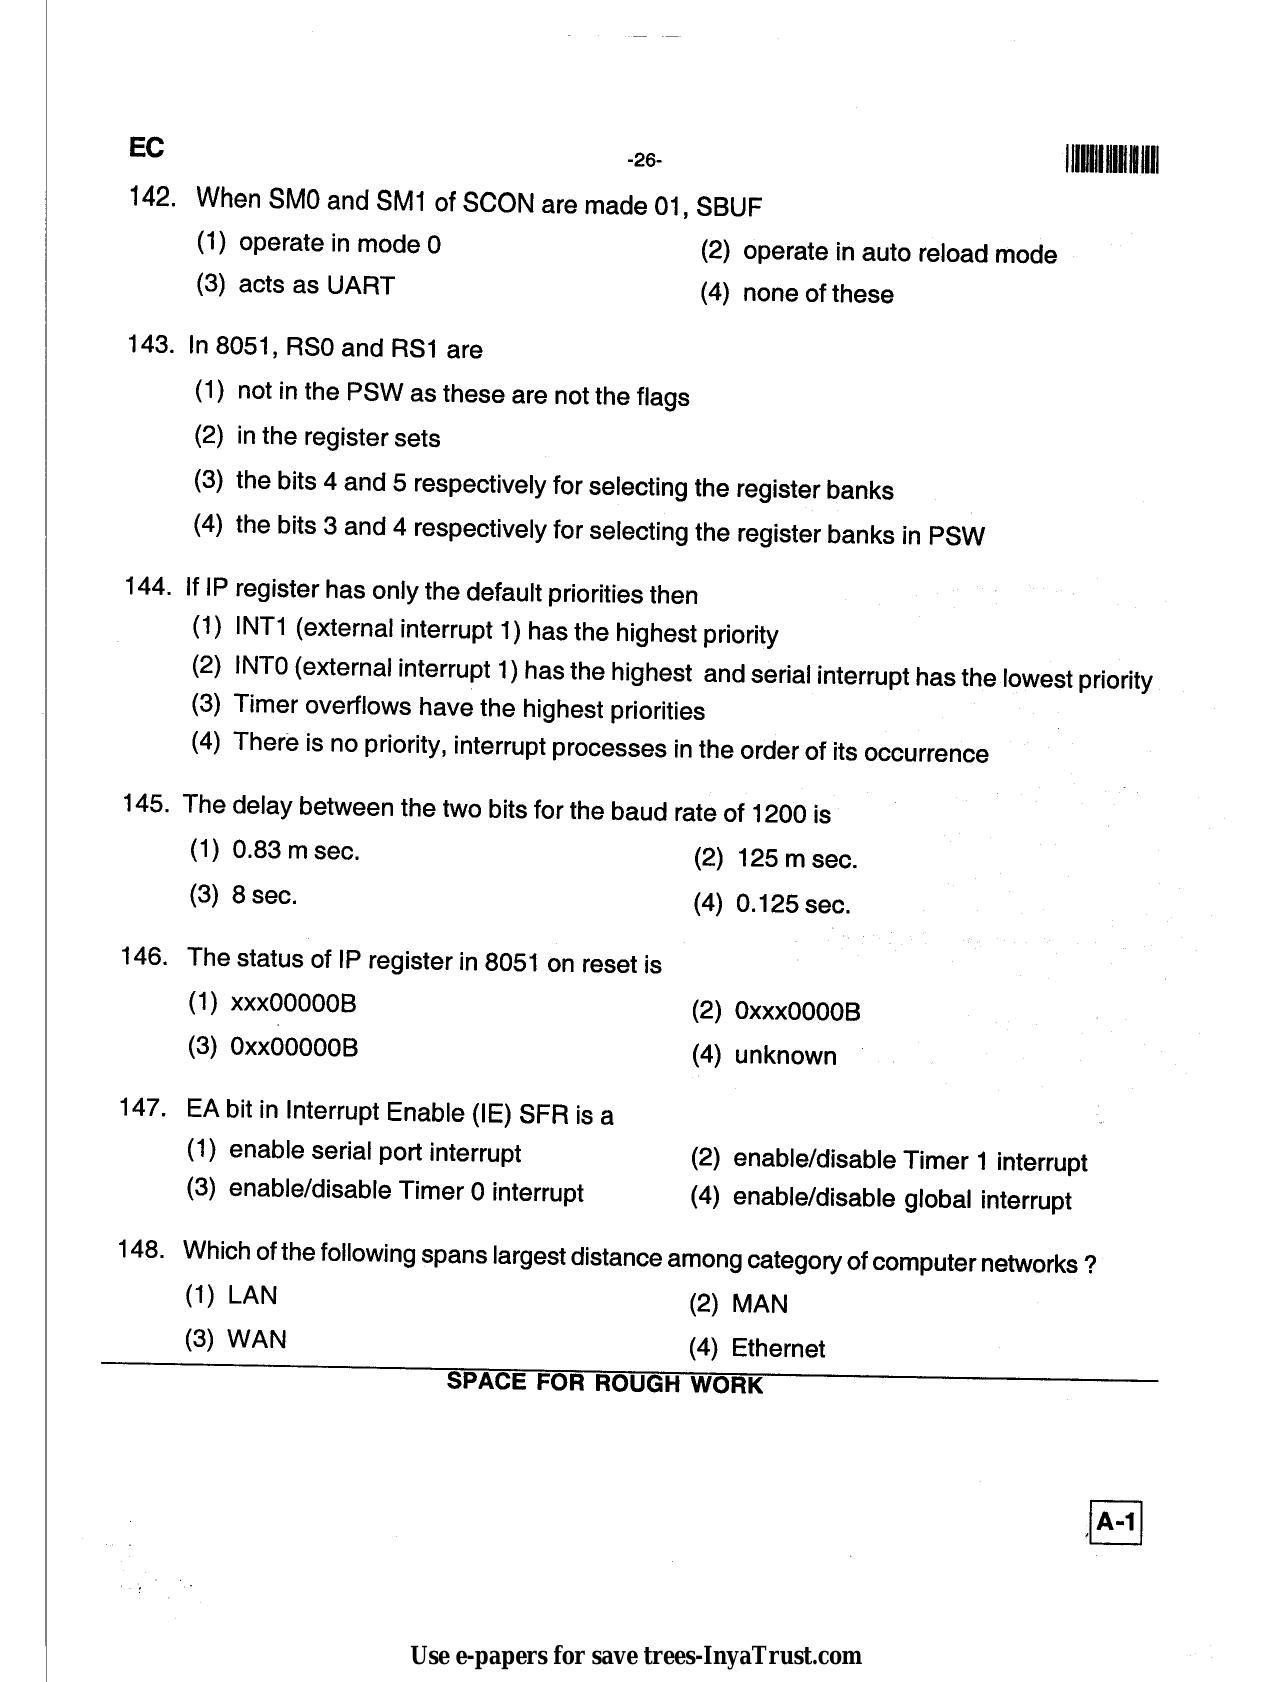 Karnataka Diploma CET- 2013 Electronics and Communication Engineering Question Paper - Page 26